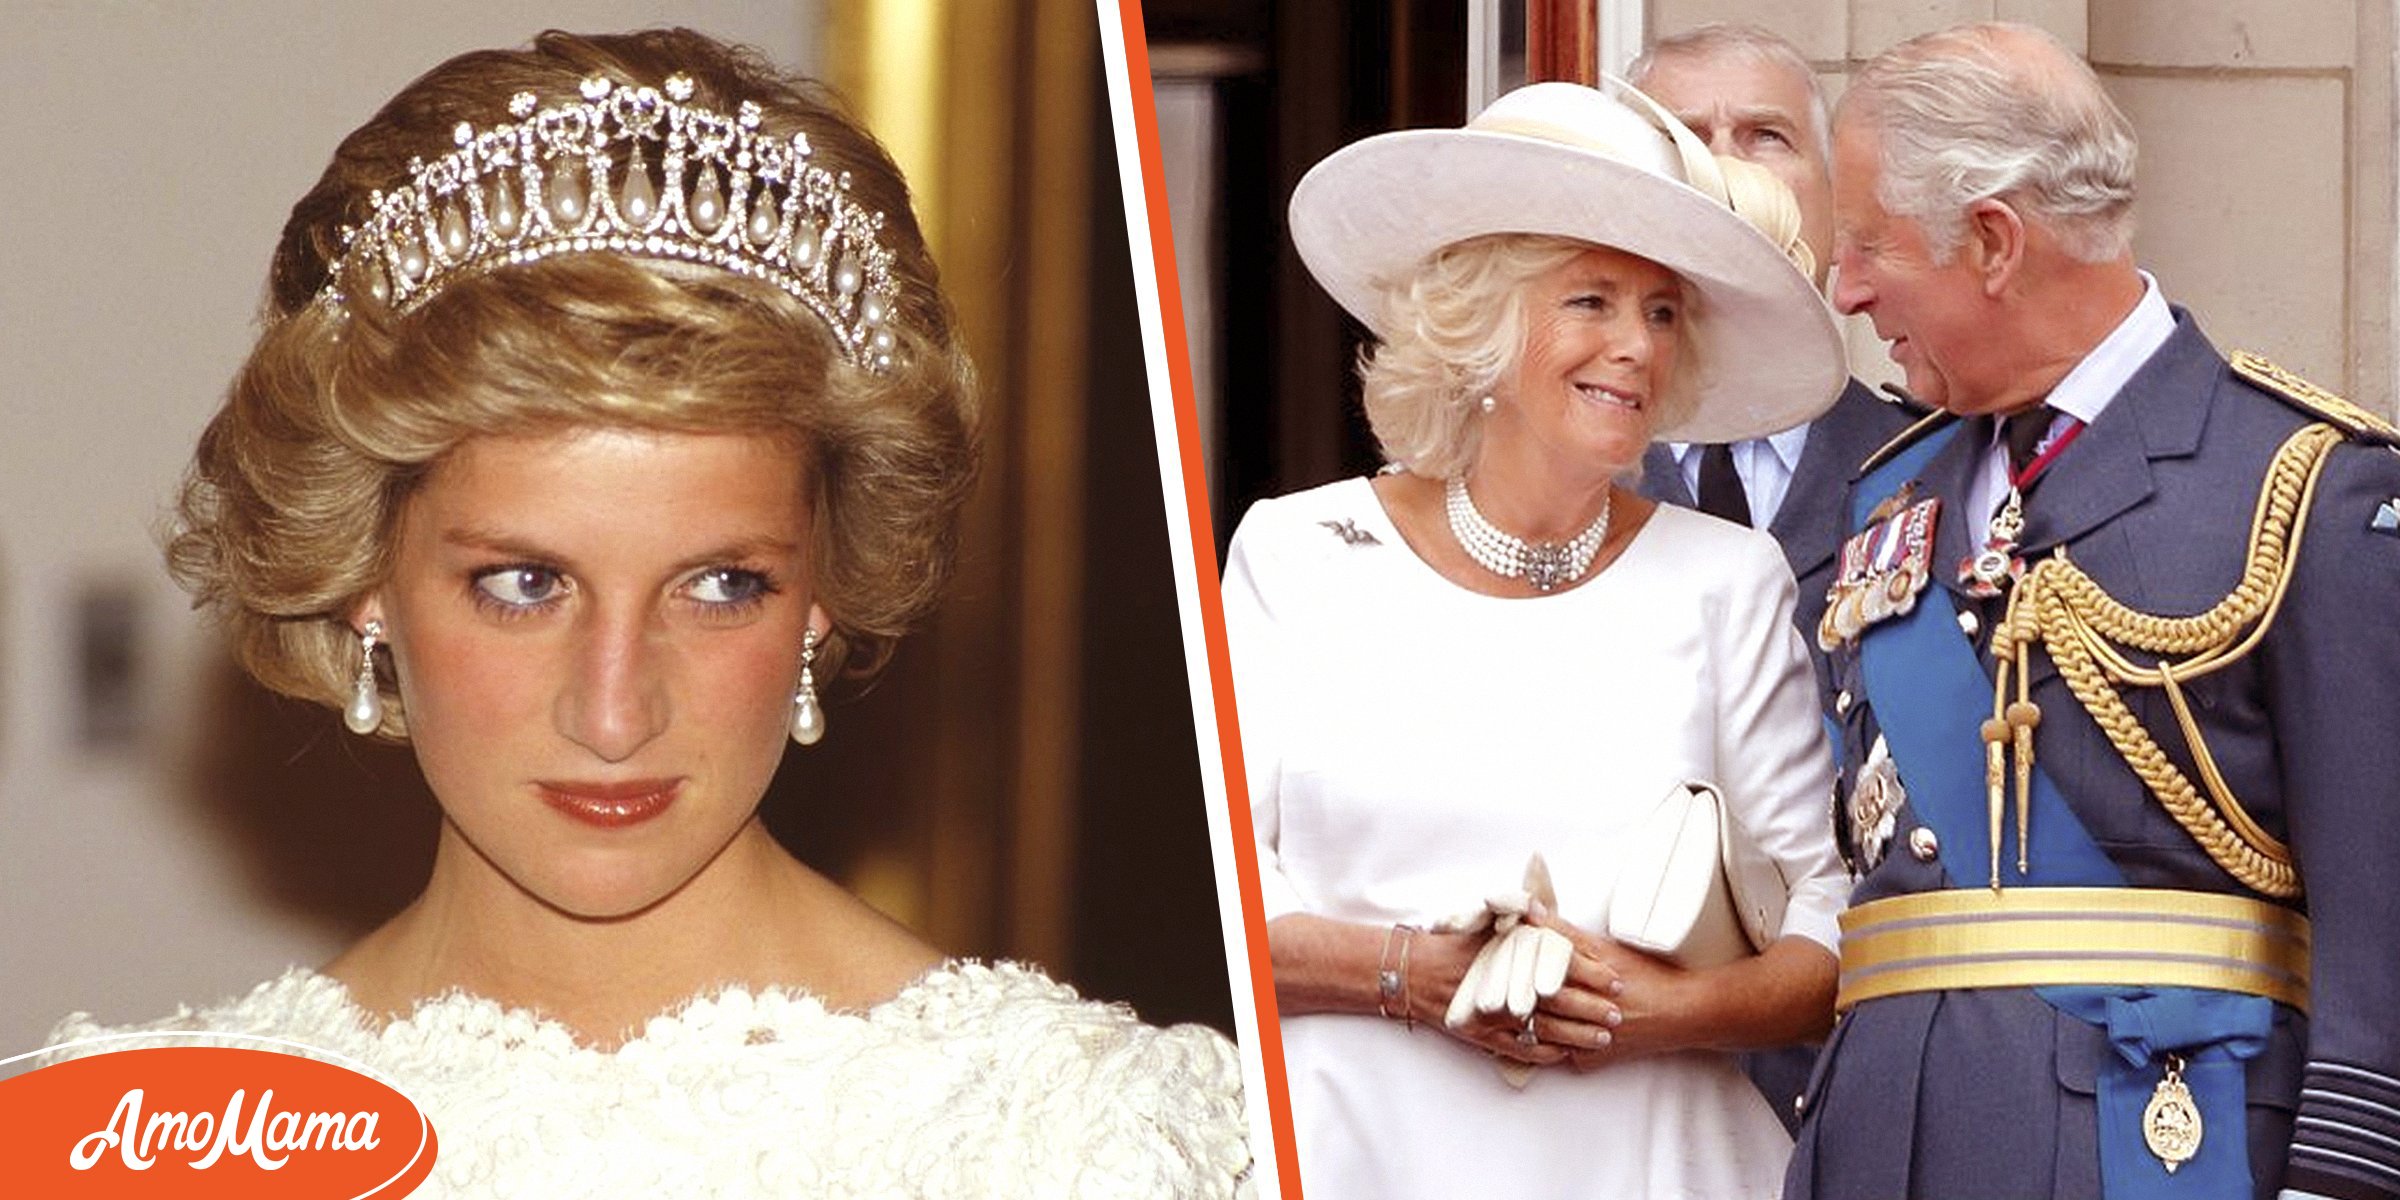 Princess Diana | Camilla Shand, Queen Consort, and King Charles III | Source: Getty Images